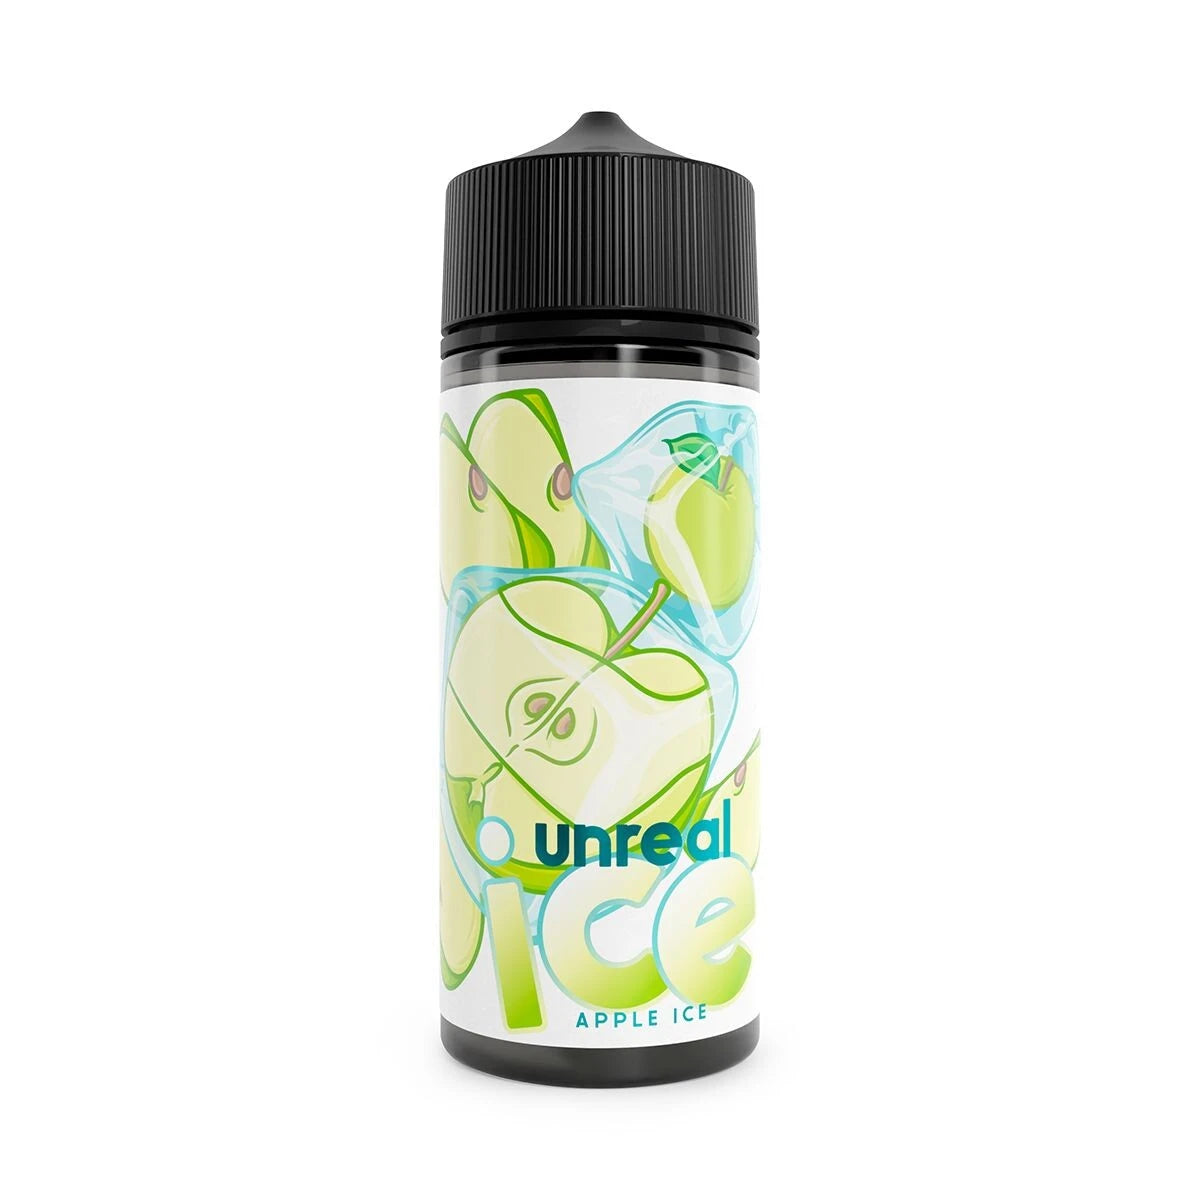 Apple Ice Shortfill by Unreal Ice. - 100ml